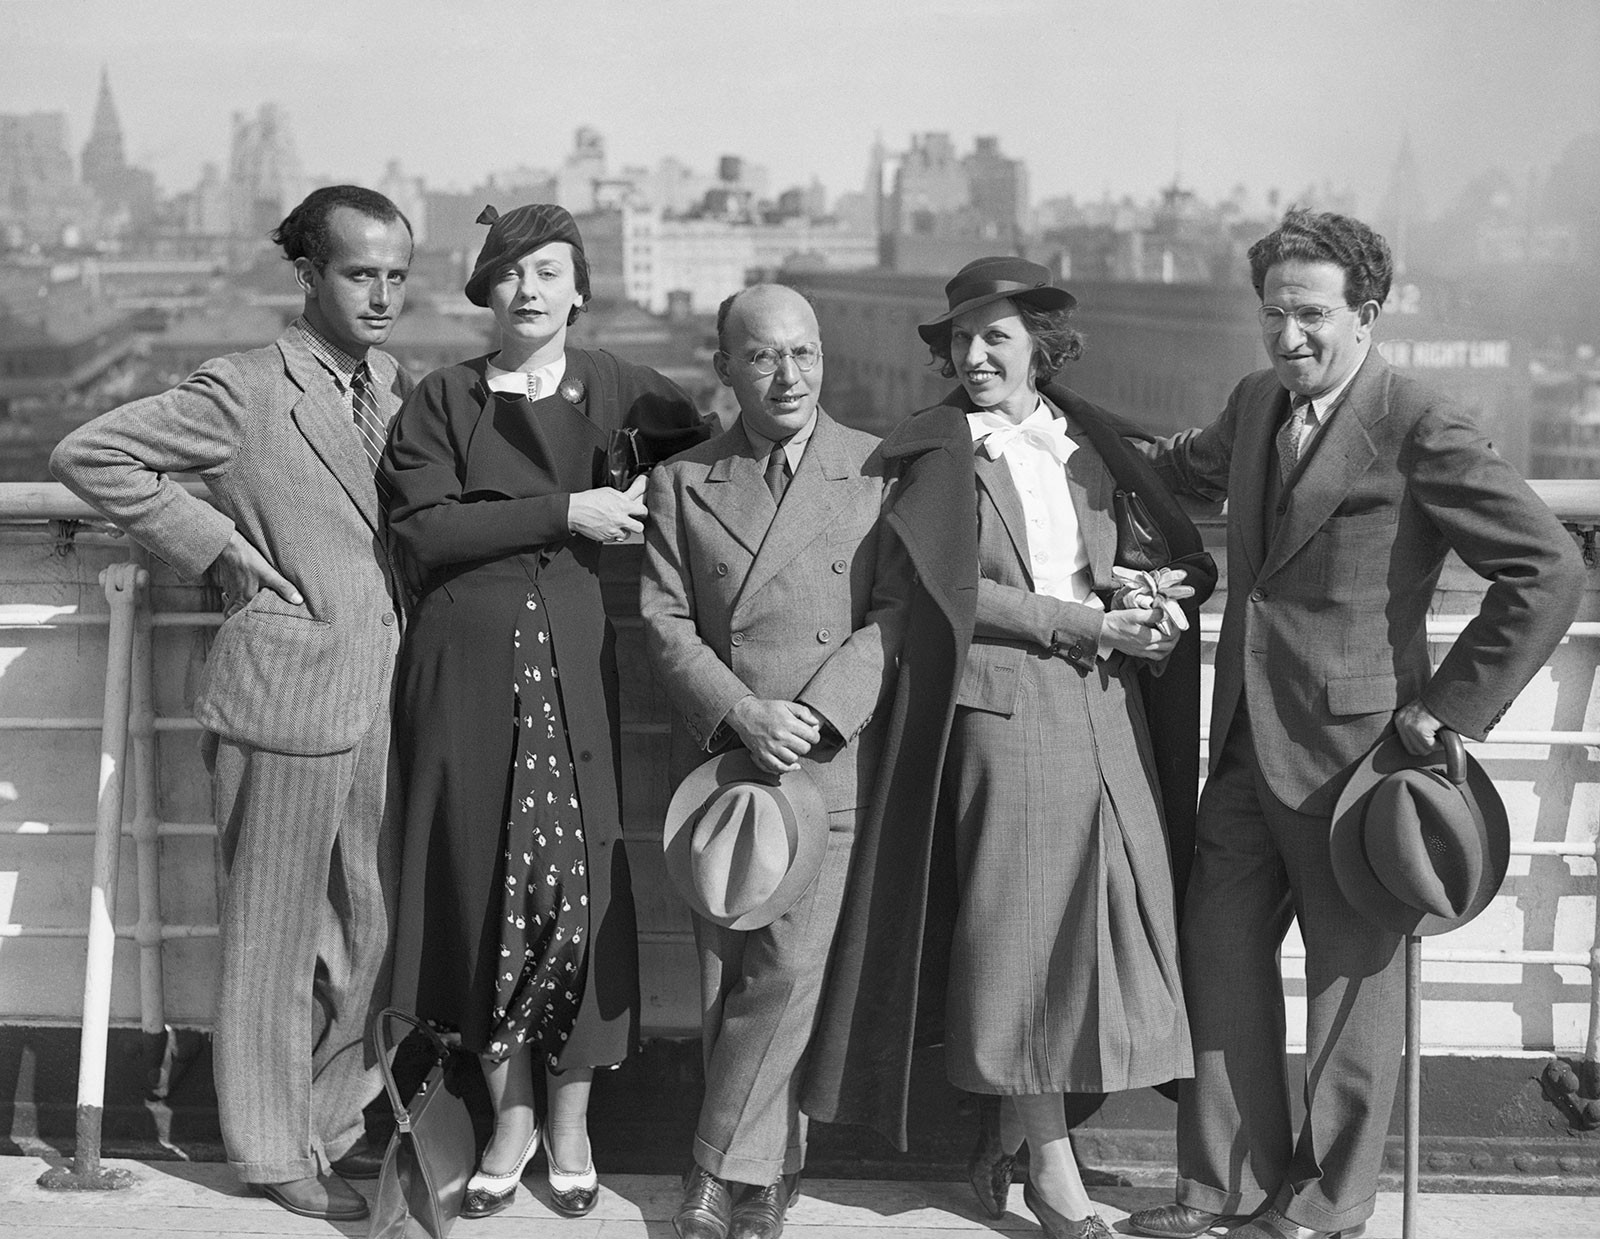 From left to right: Francesco and Eleonora Mendelssohn with Kurt Weil, Lotte Lenya, and theater producer Meyer Wolf Weisgal upon arriving in New York on October 10th, 1935 © corbis images